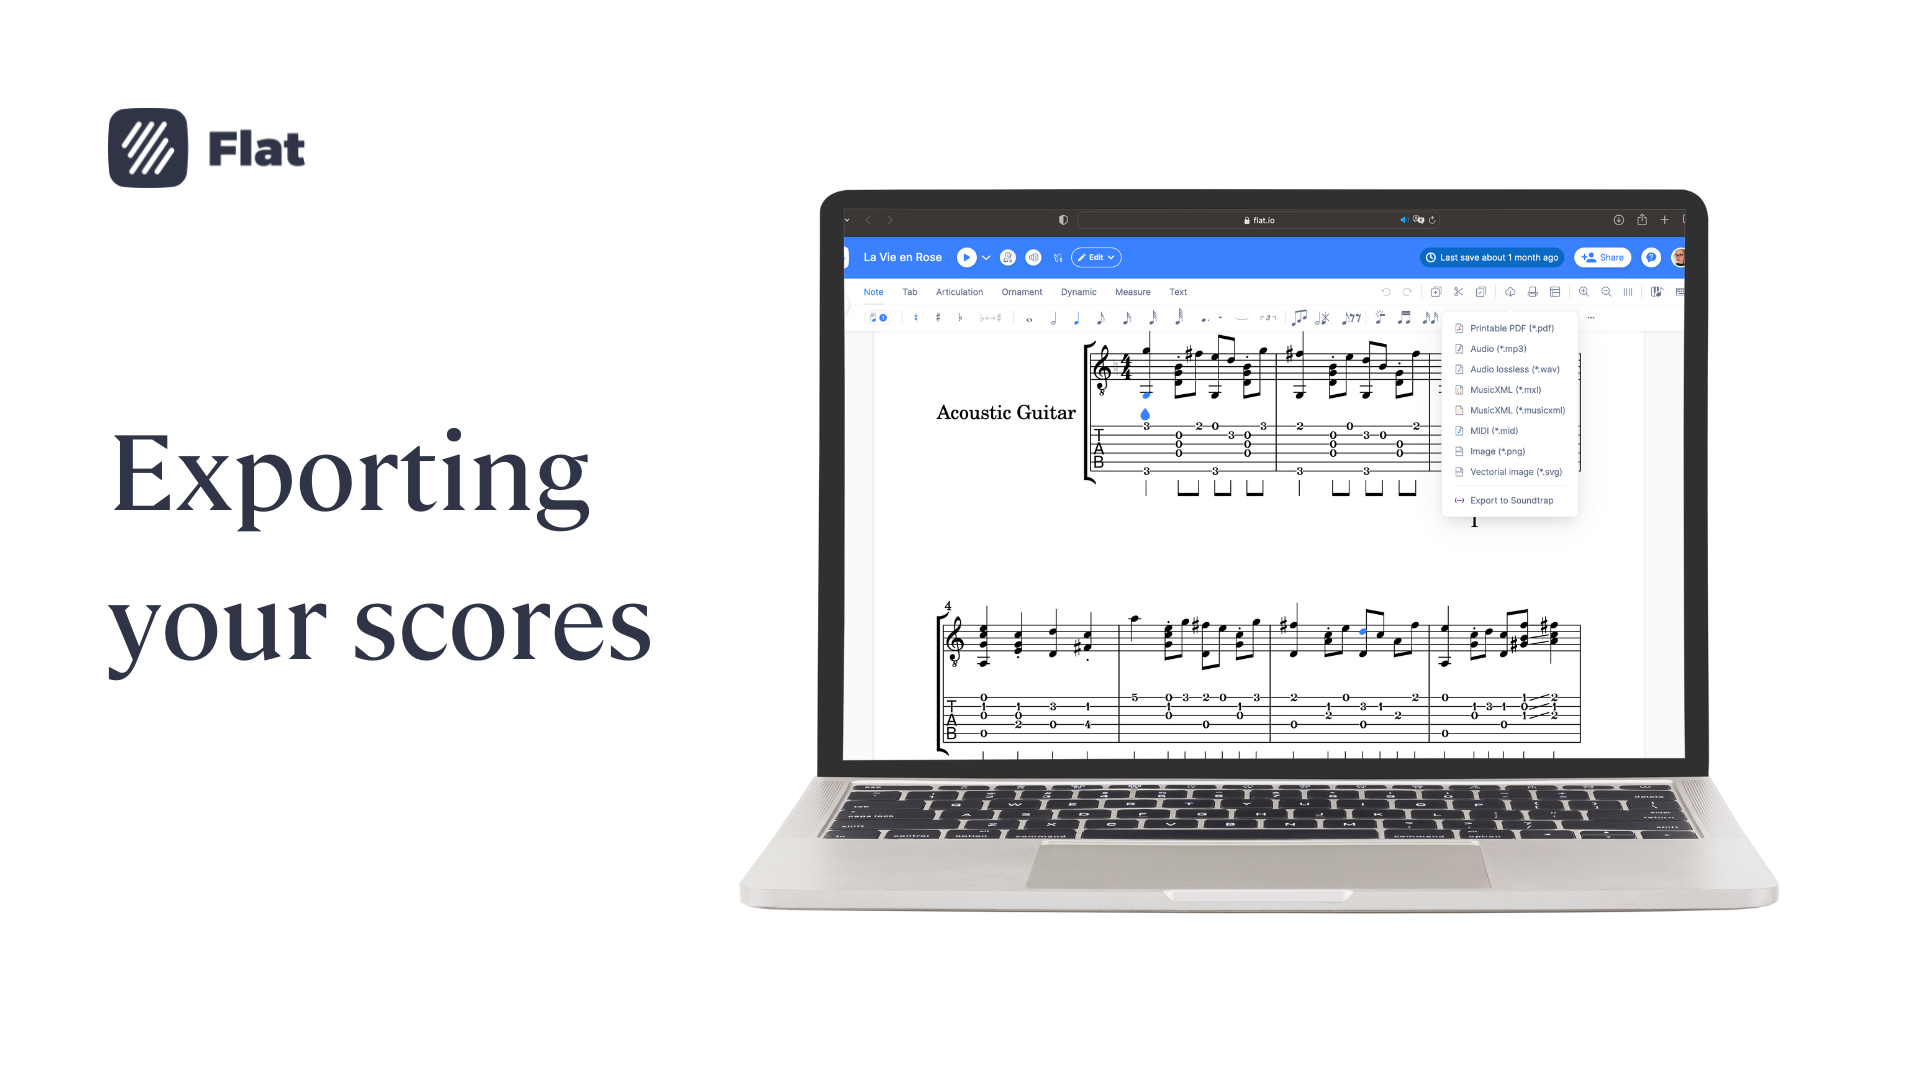 How to print or export your scores